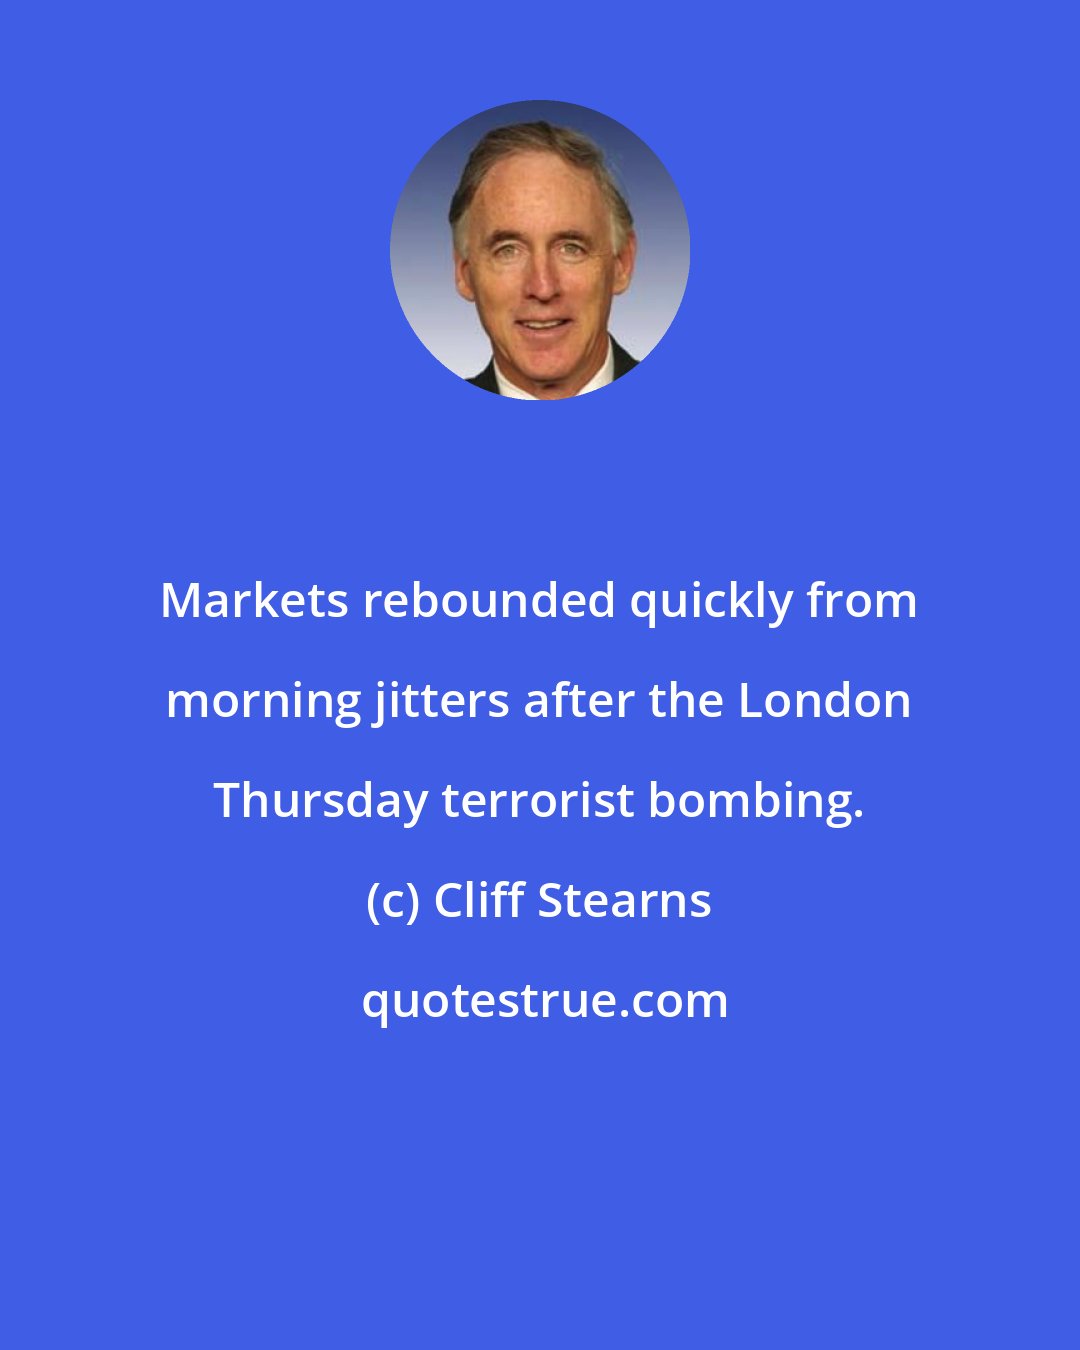 Cliff Stearns: Markets rebounded quickly from morning jitters after the London Thursday terrorist bombing.